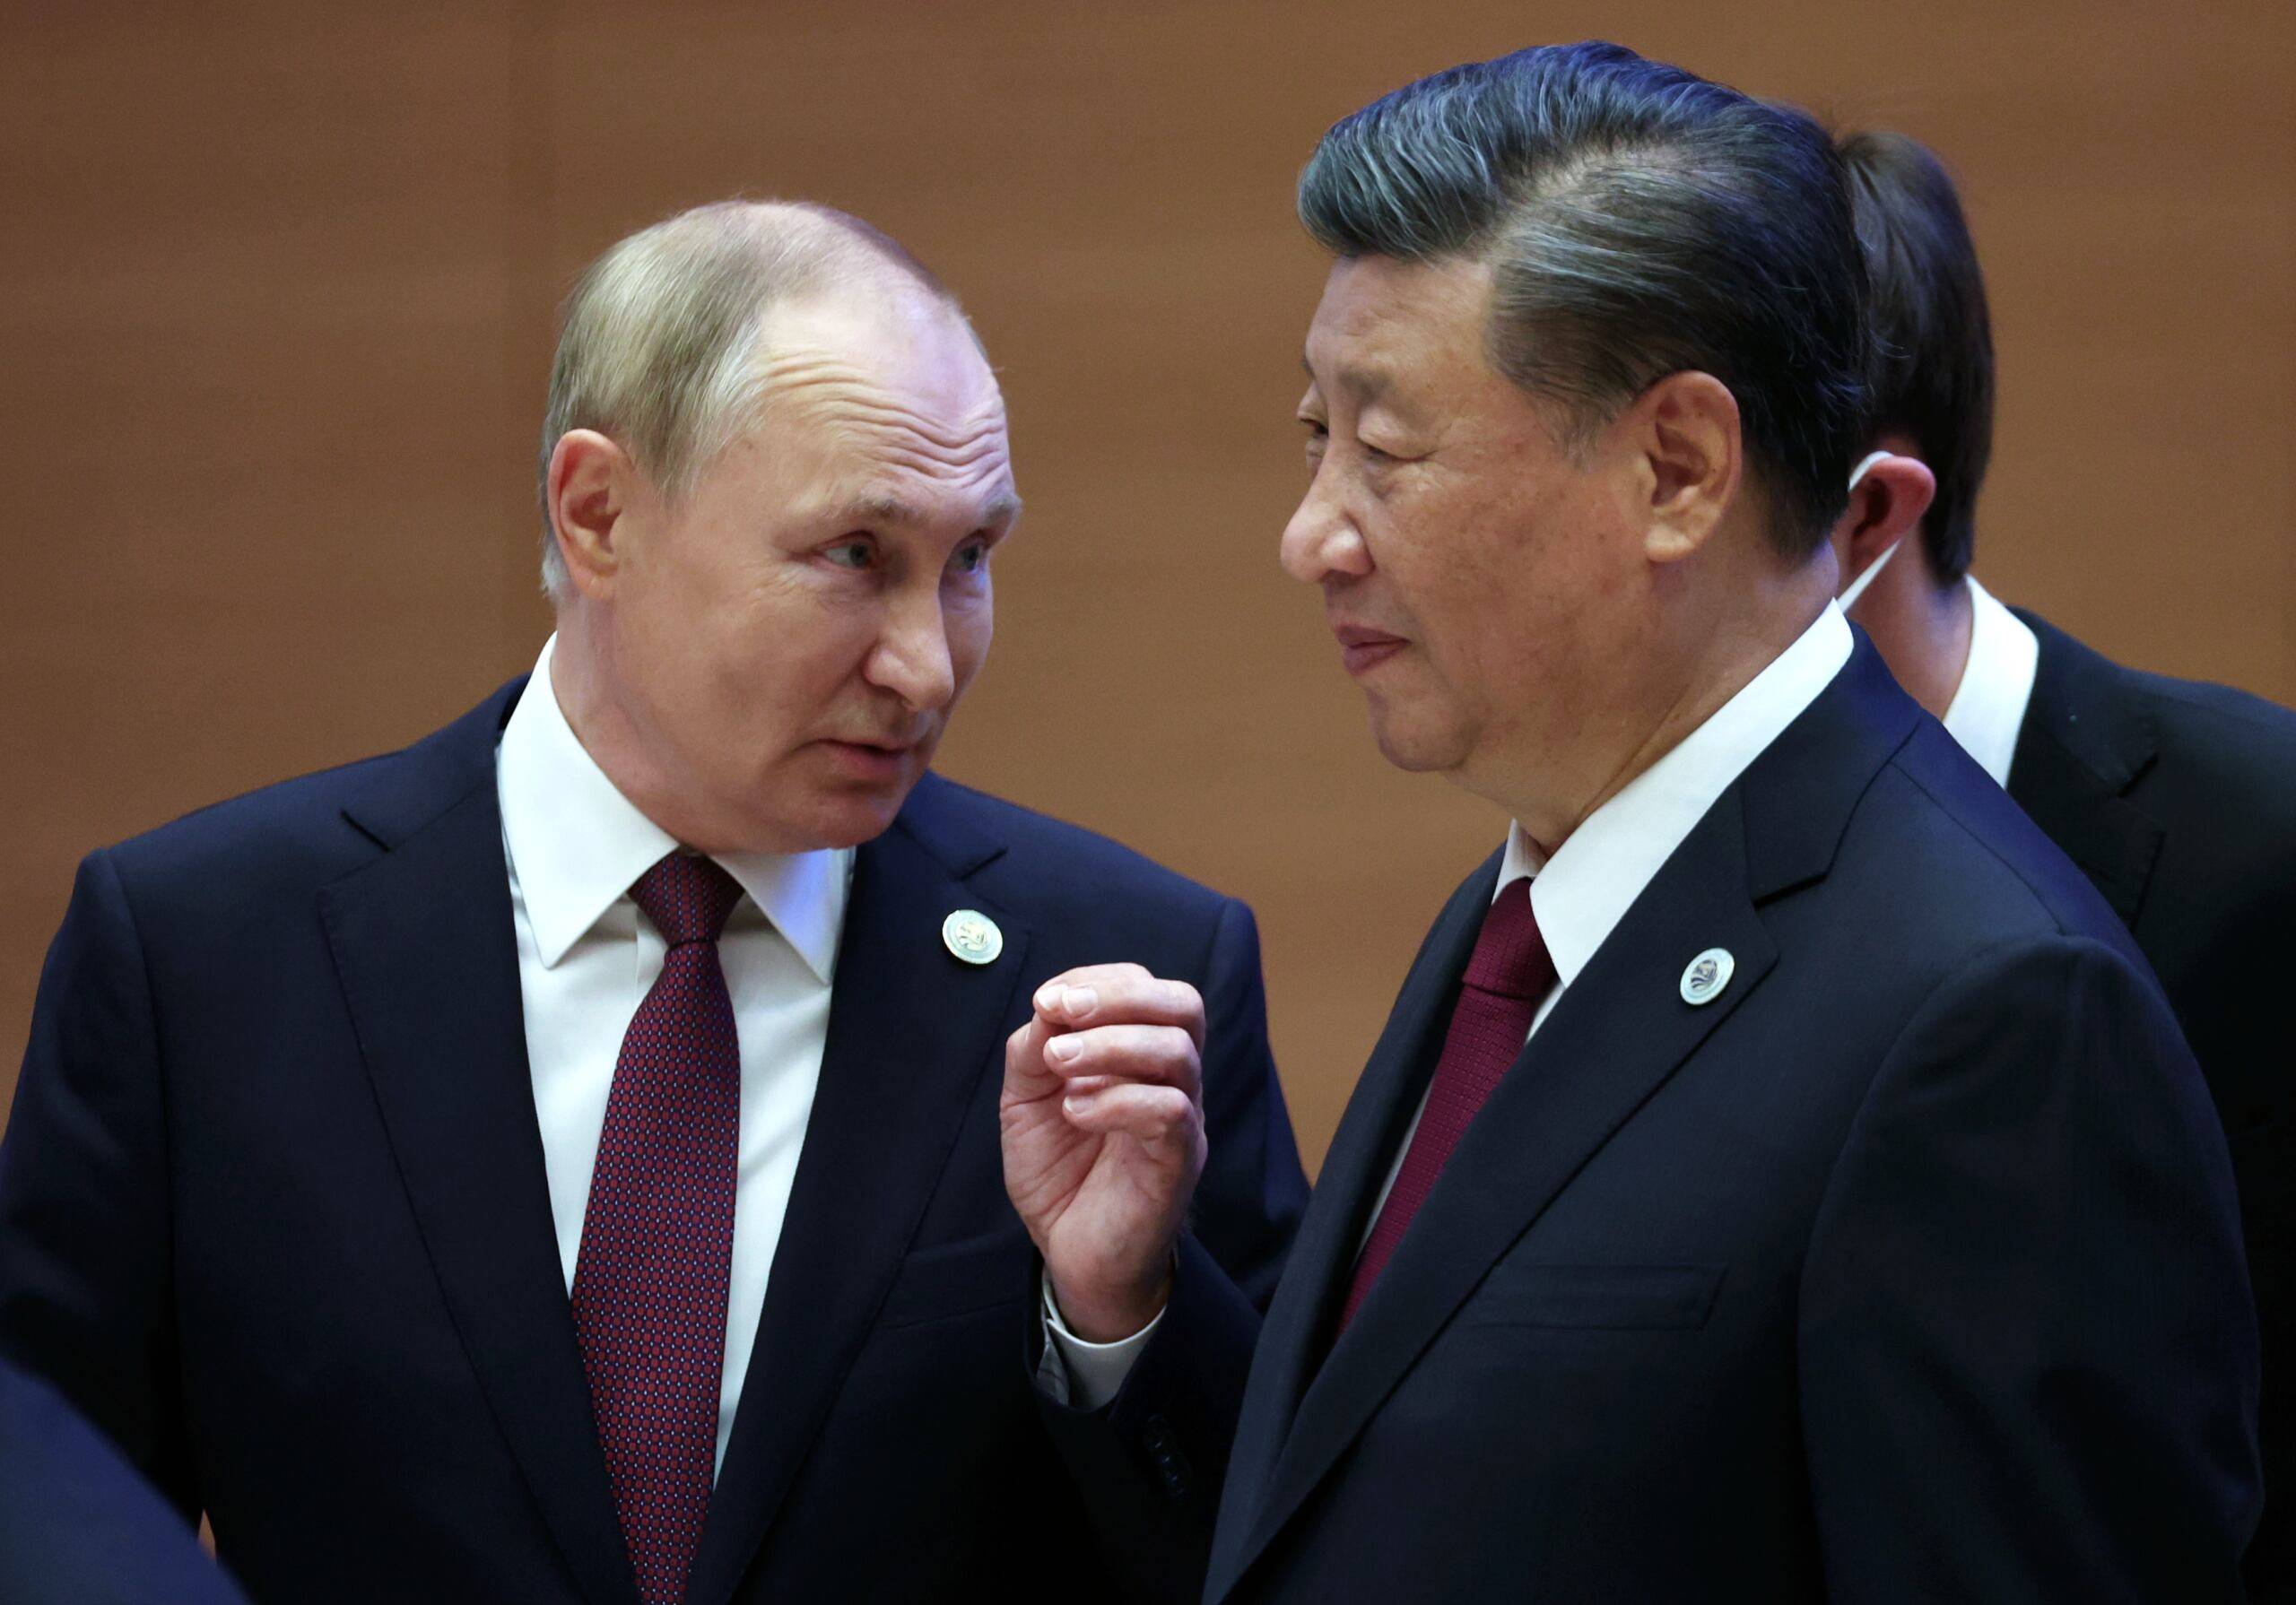 Russian President Vladimir Putin speaks to China's President Xi Jinping during the Shanghai Cooperation Organisation (SCO) leaders' summit in Samarkand on September 16, 2022. (Photo by Sergei BOBYLYOV / SPUTNIK / AFP)